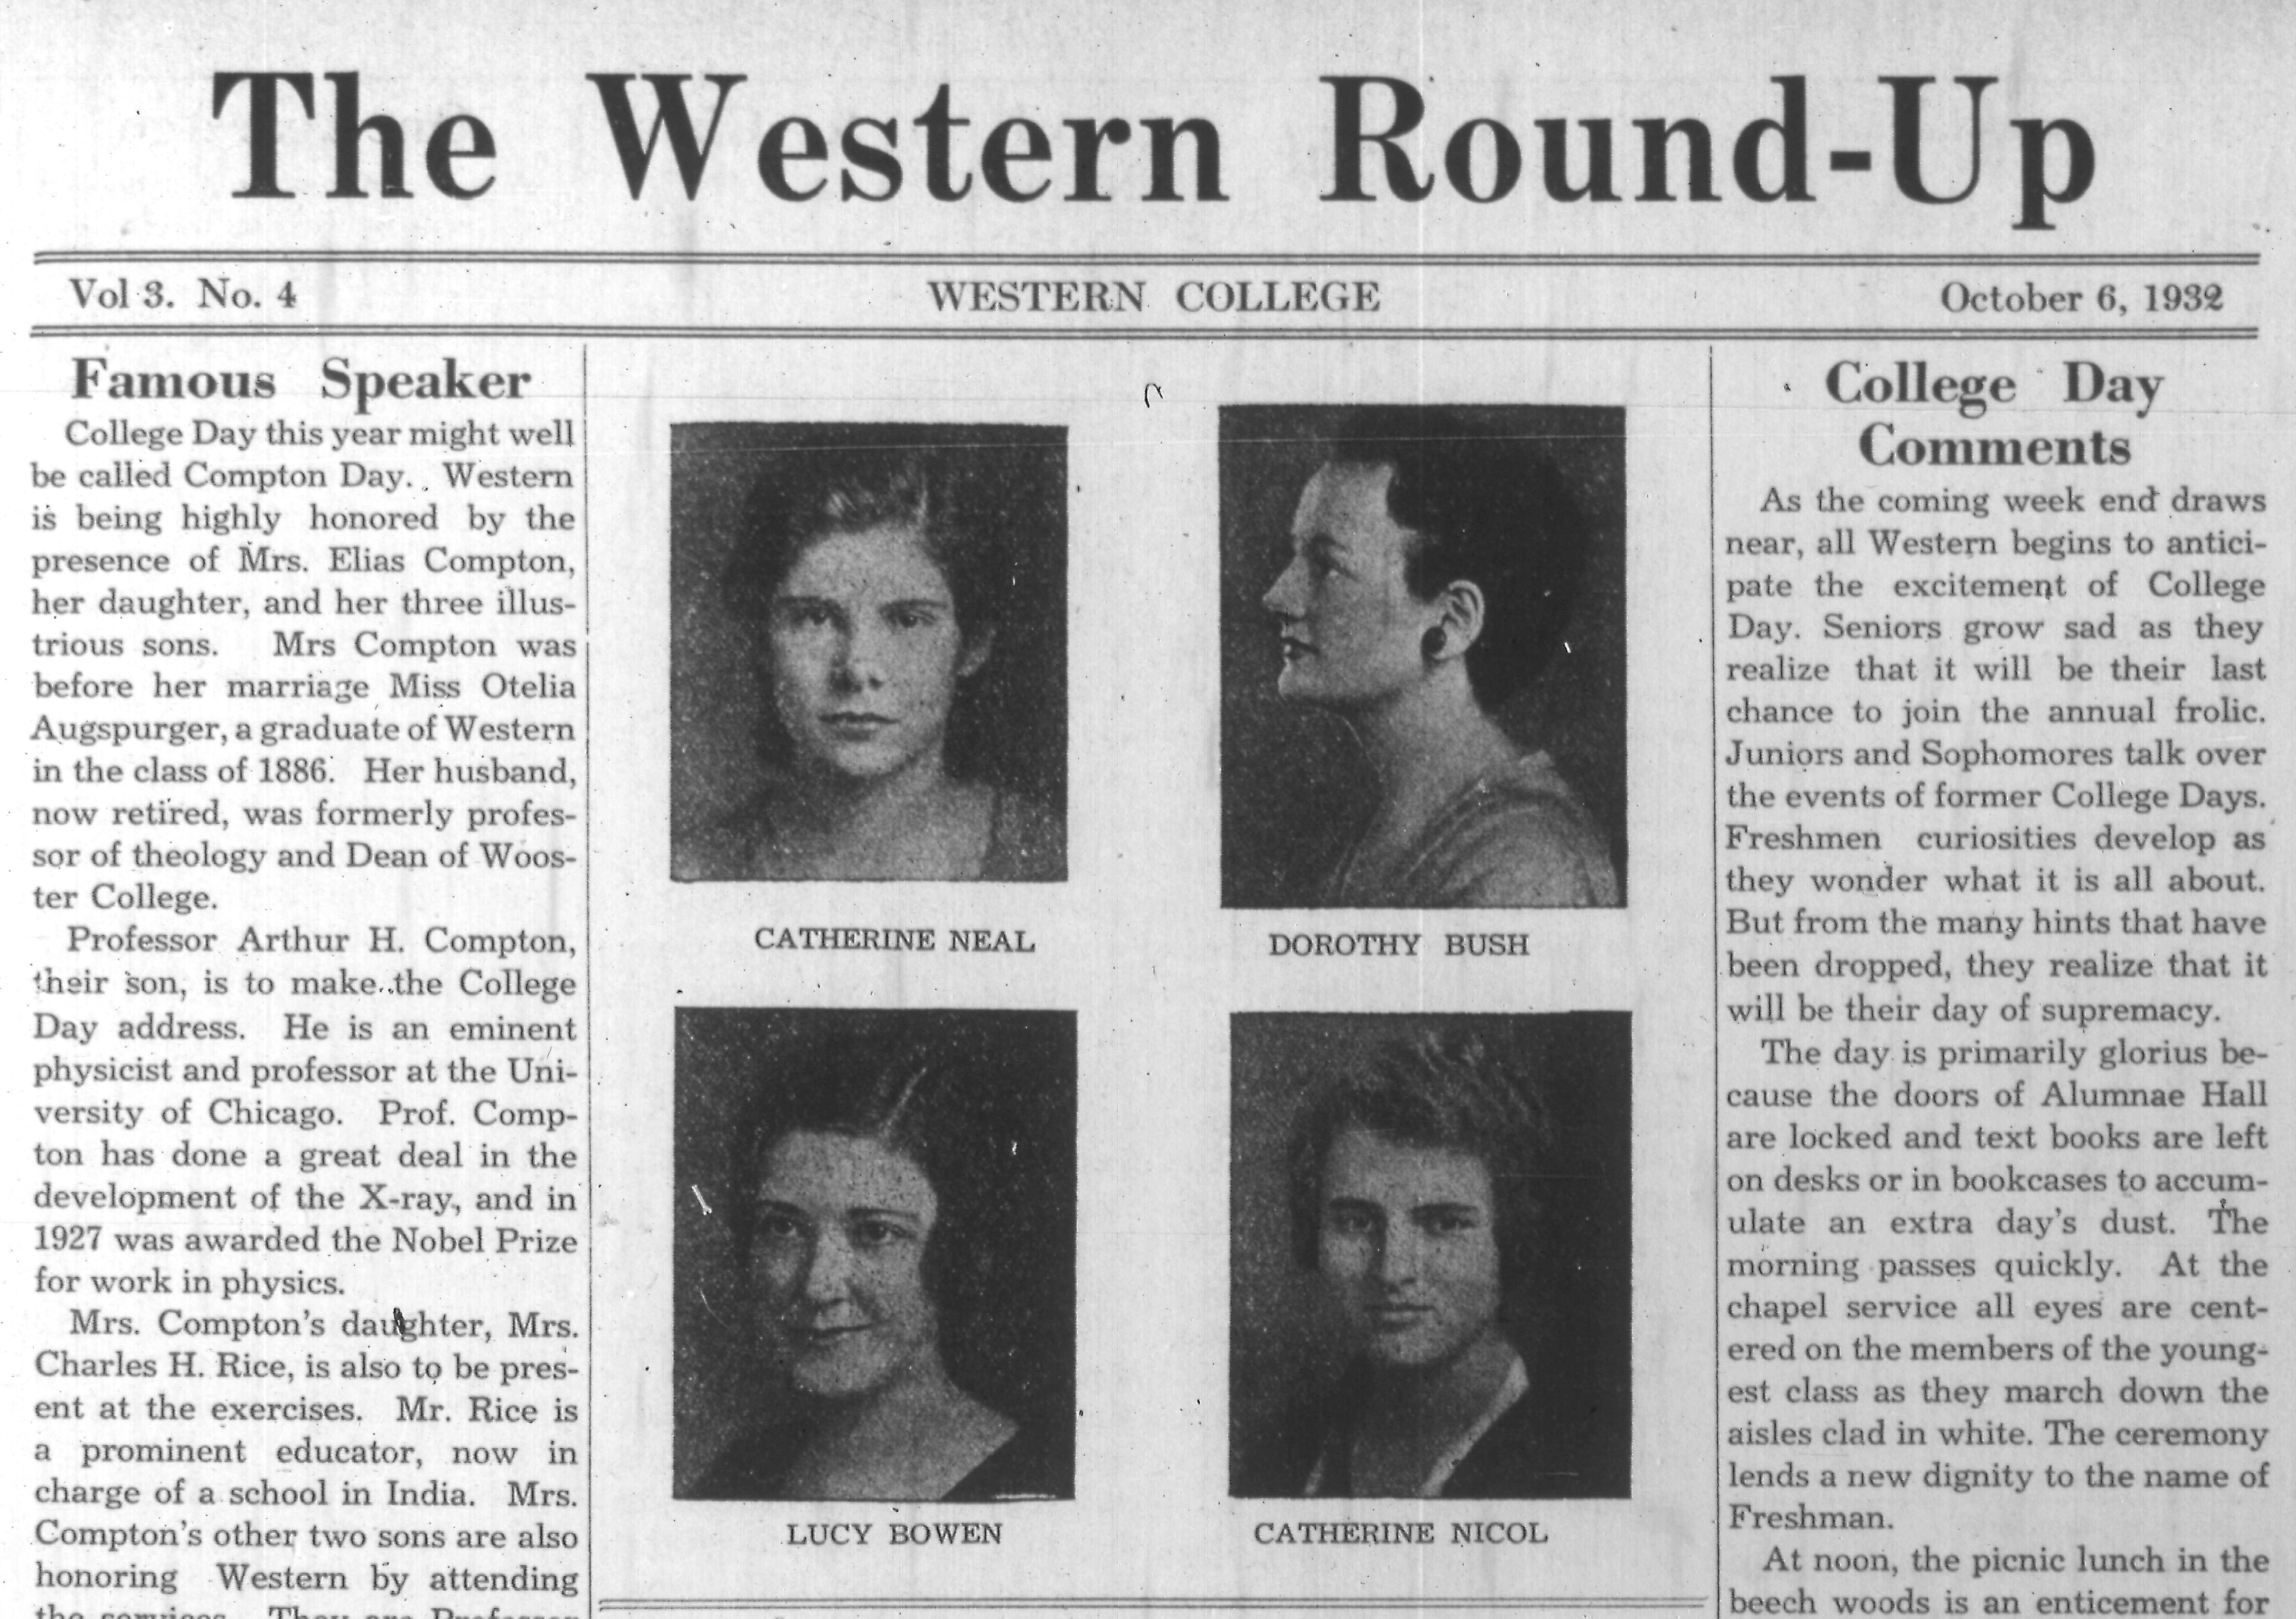 Front page of Western Round-Up newspaper